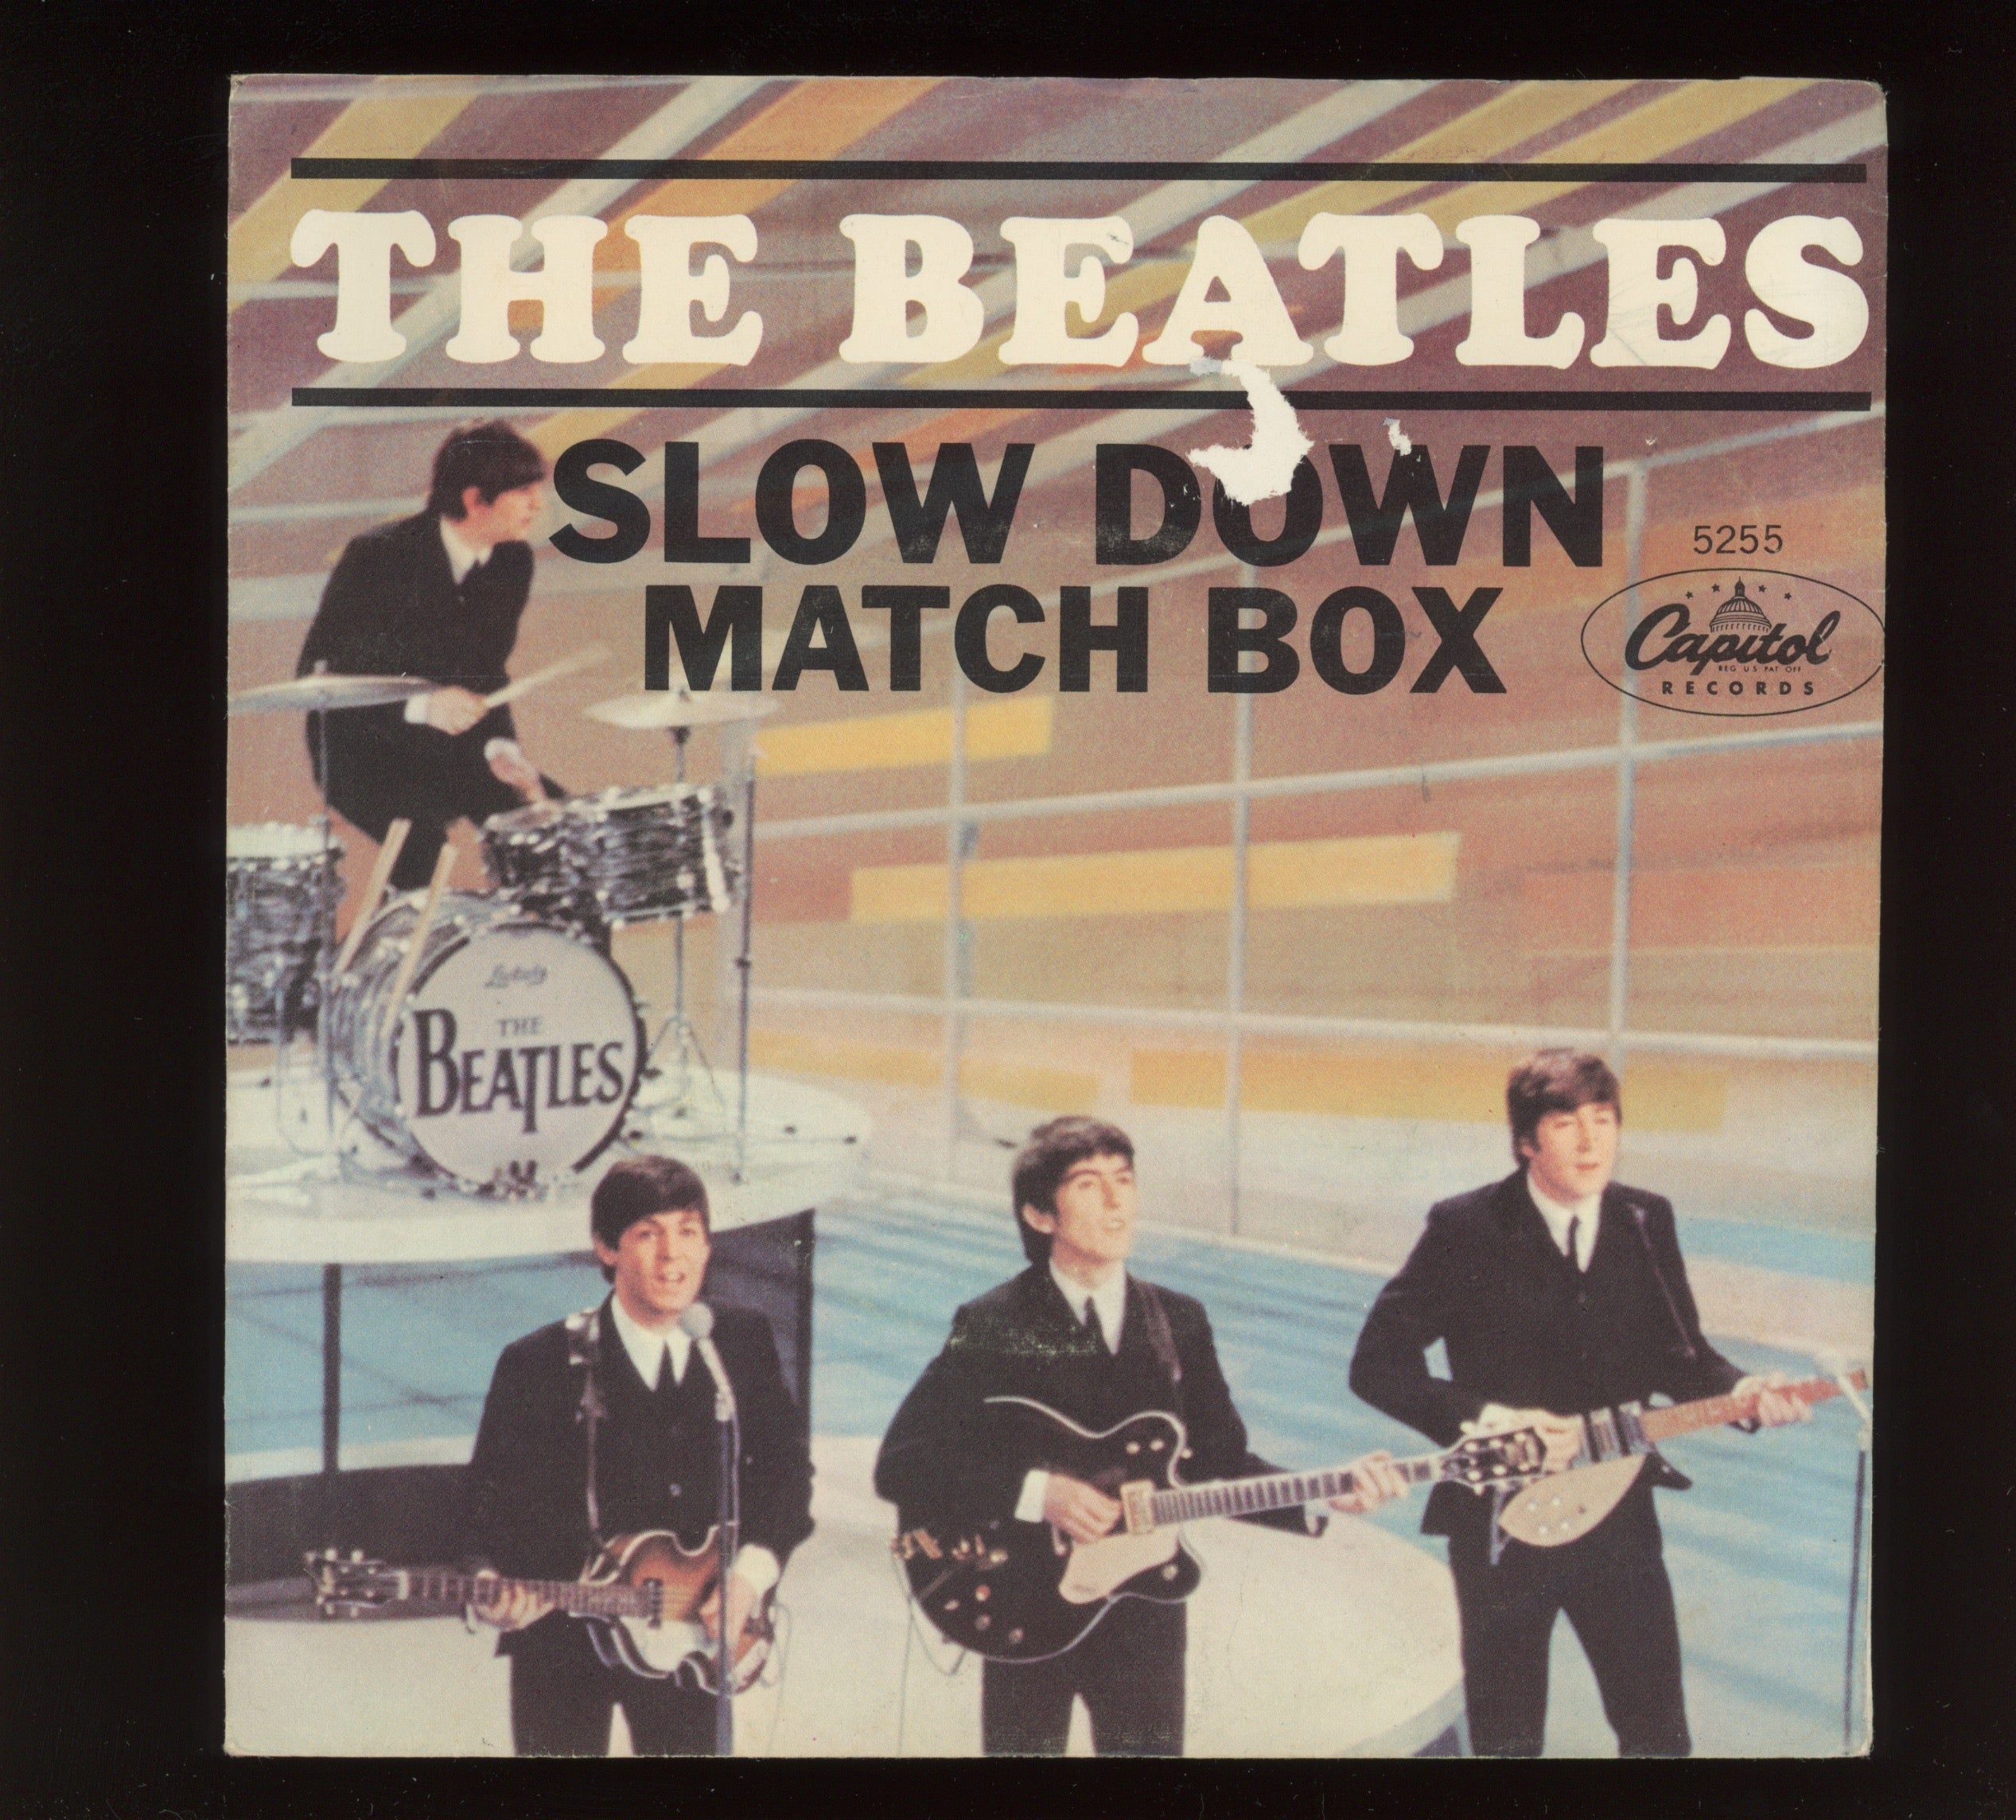 The Beatles - Matchbox / Slow Down on Capitol 45 With Picture Sleeve